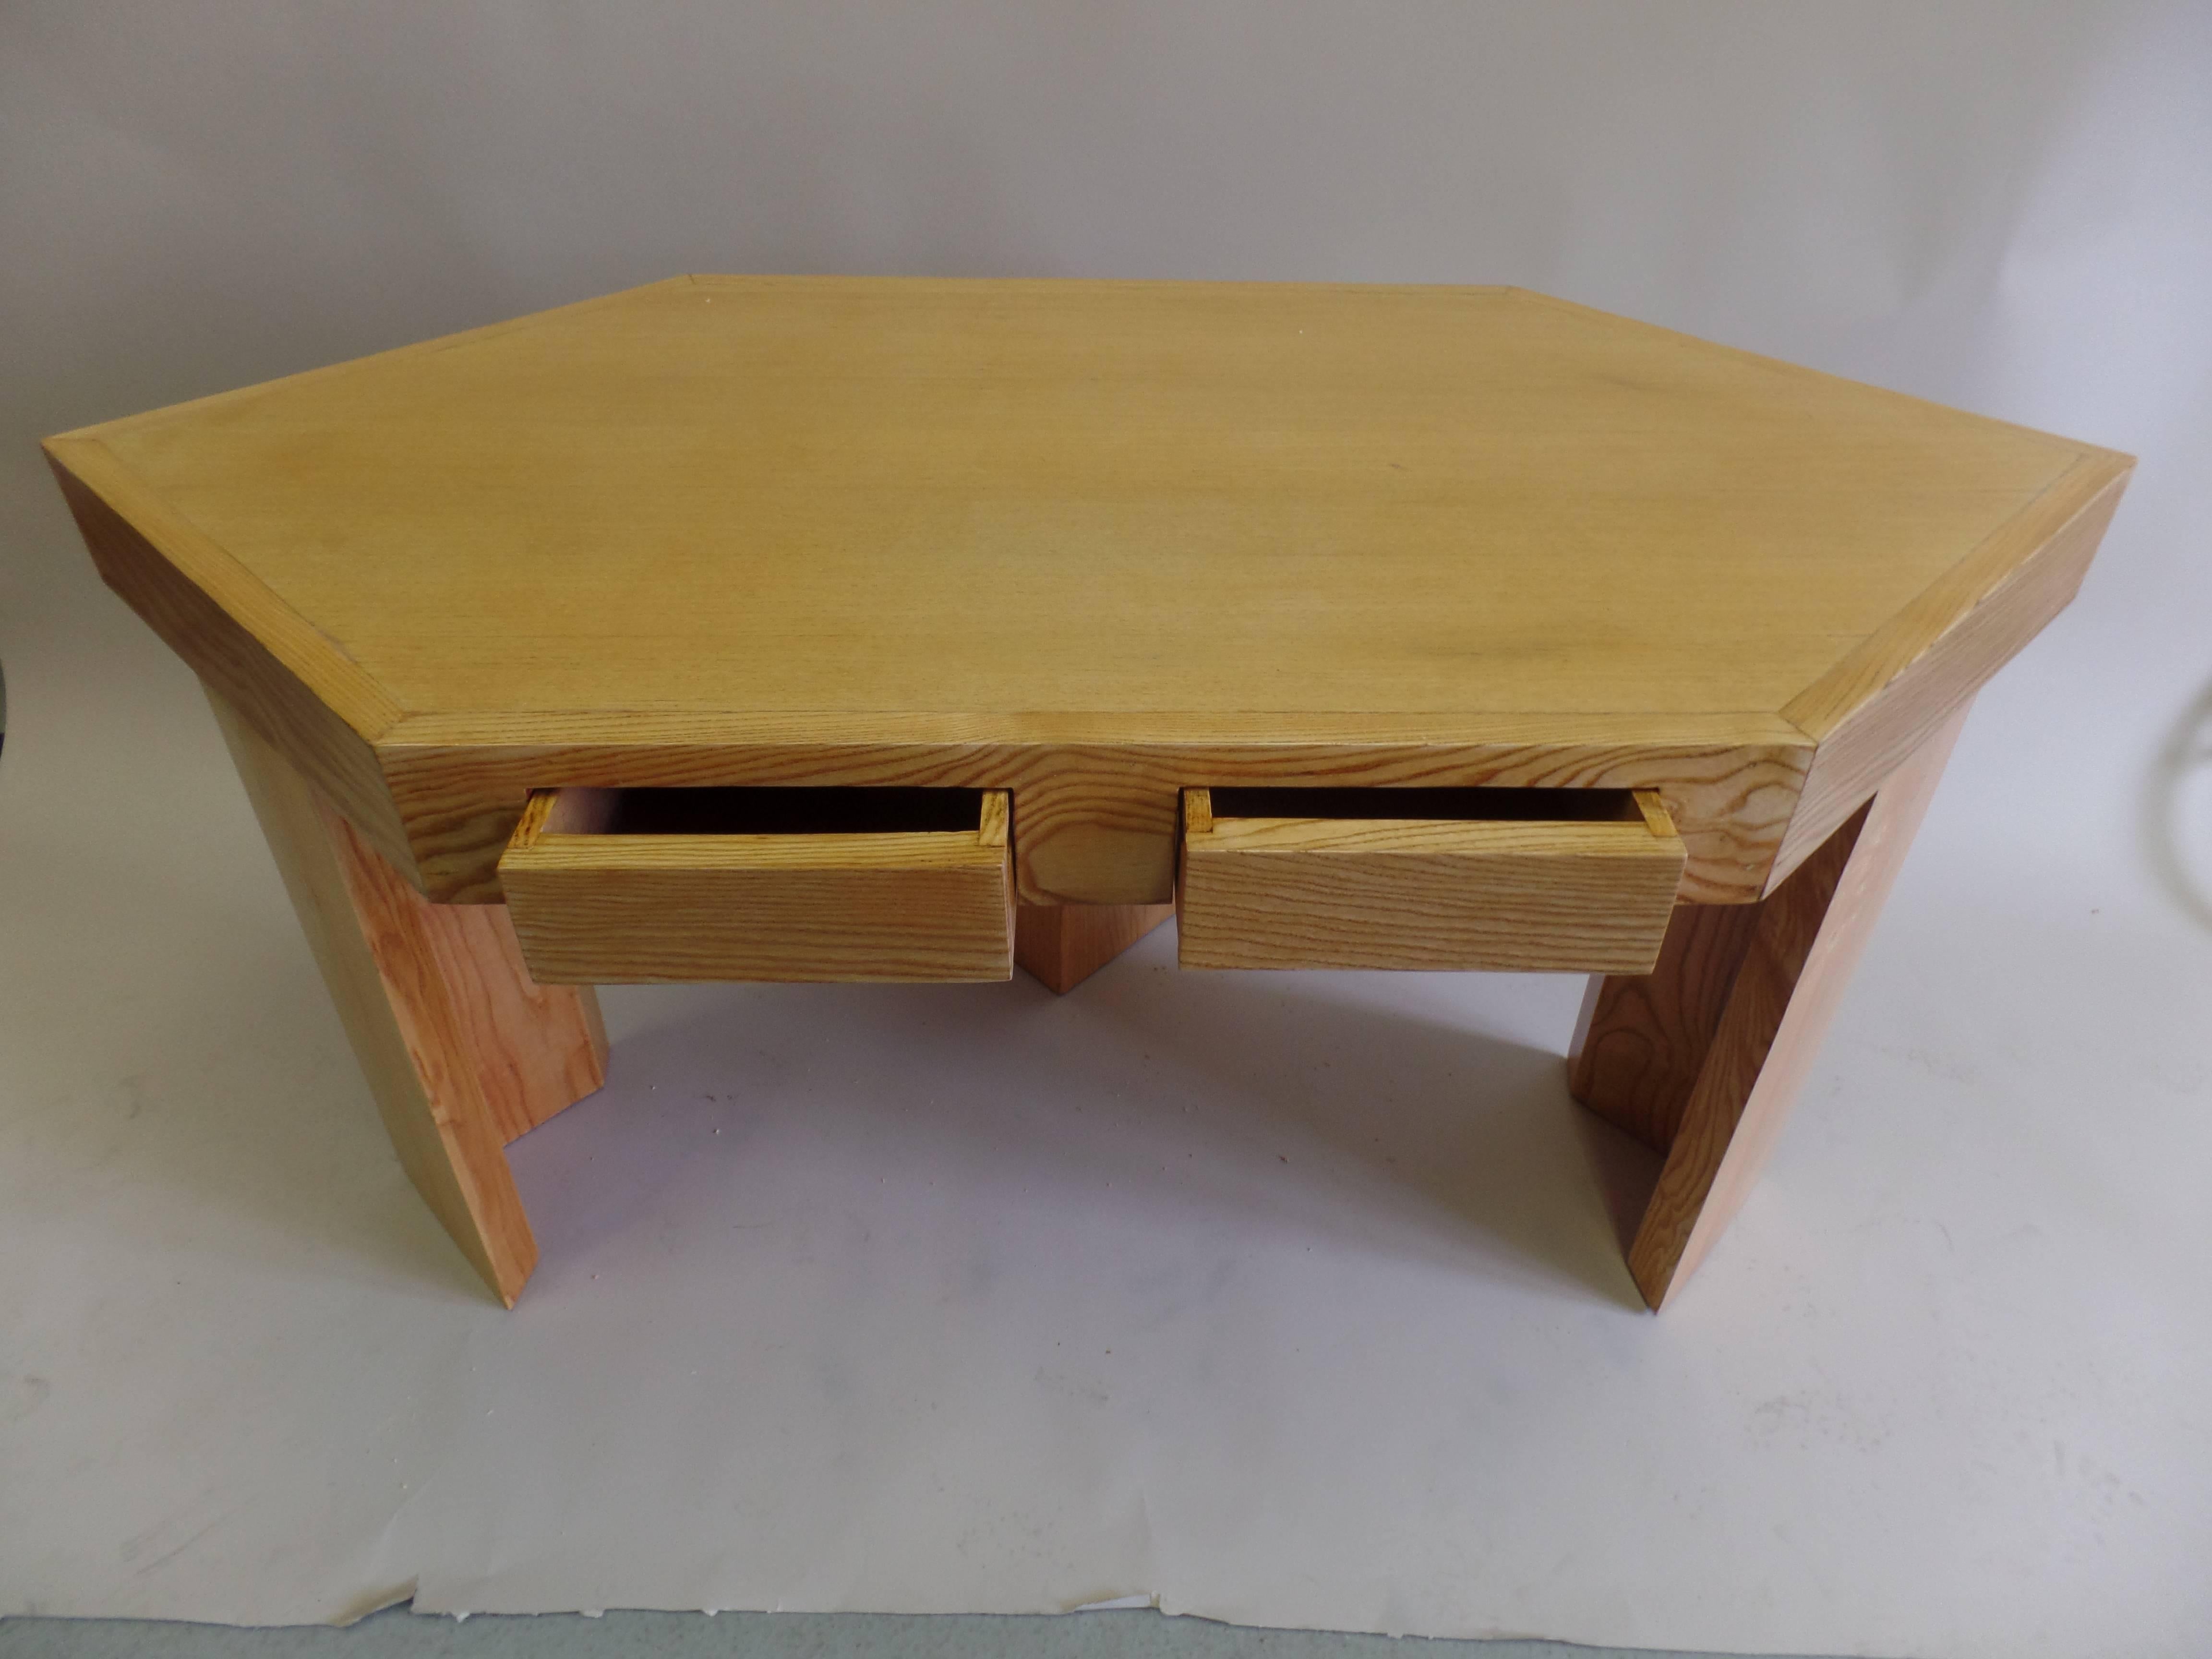  French Futurist / Mid-Century Modern Trapezoid Desk by Alain Marcoz, circa 1956 In Good Condition For Sale In New York, NY